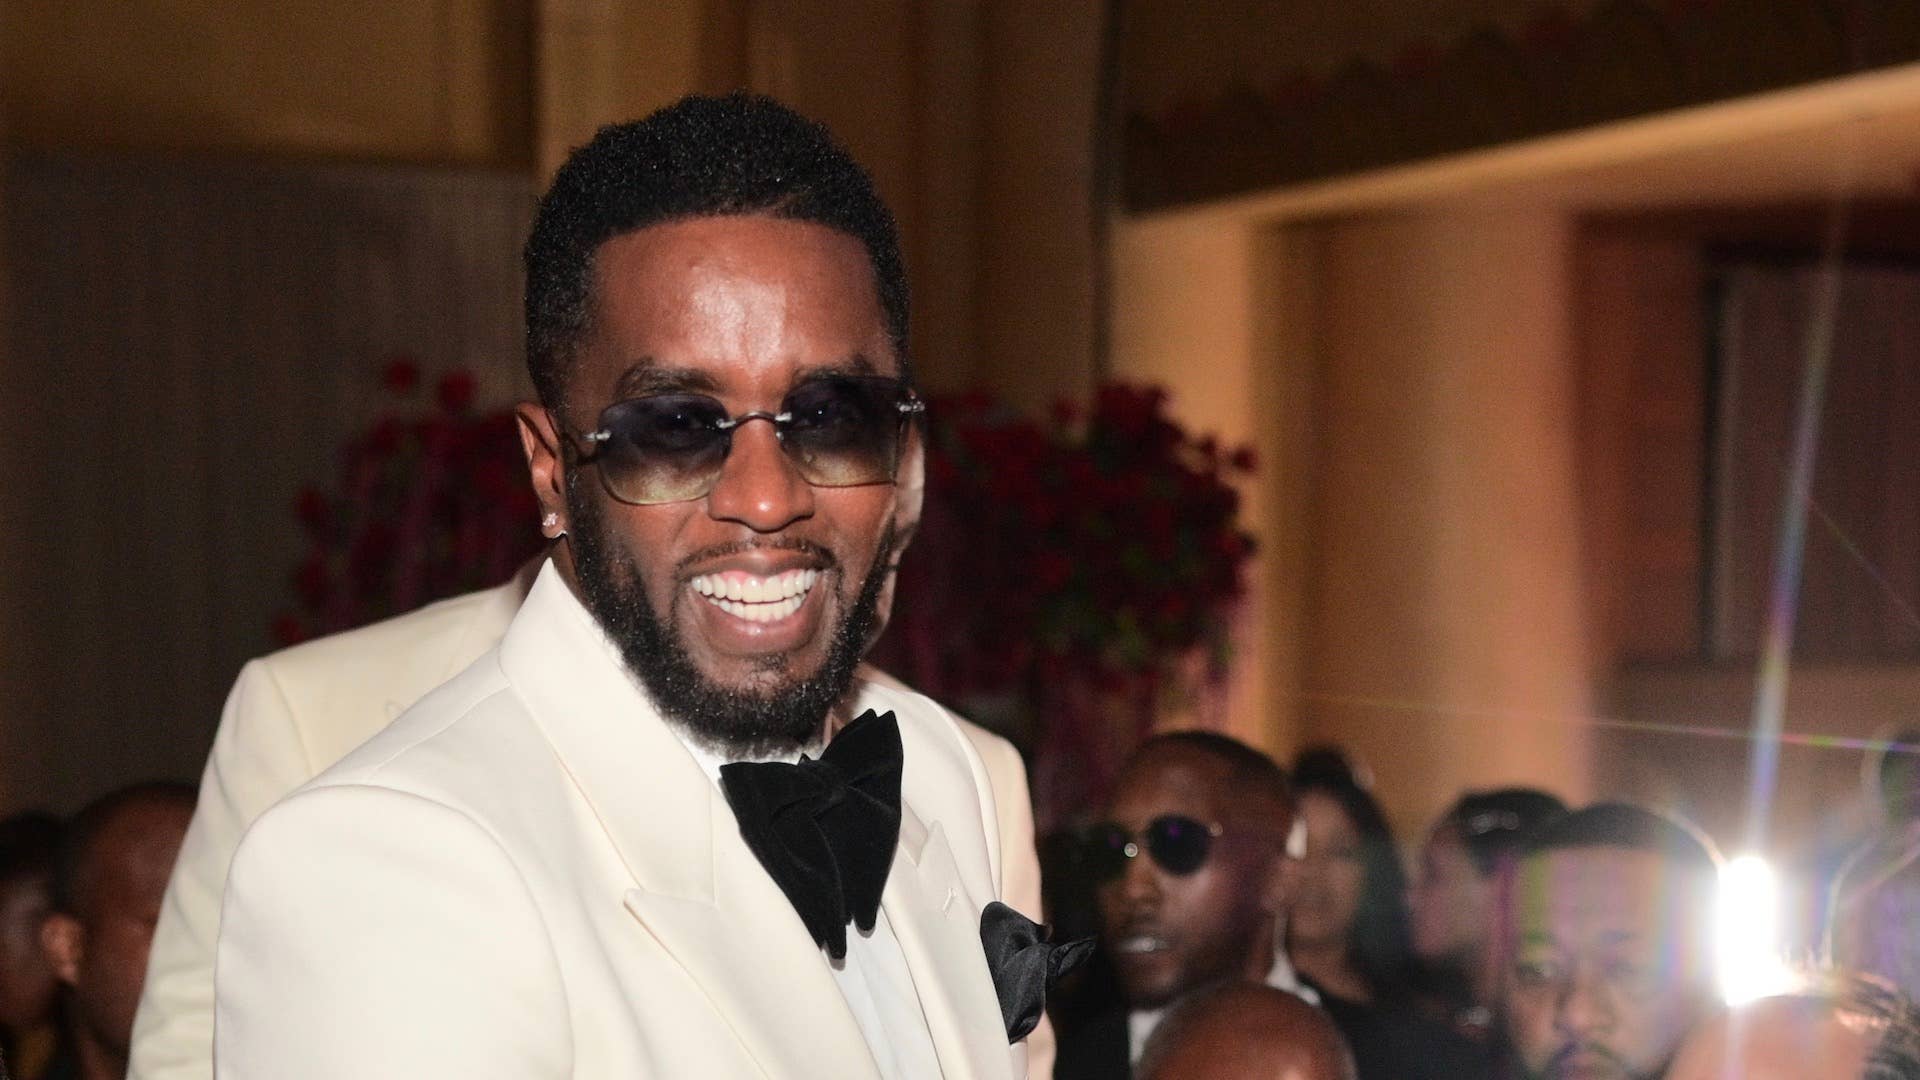 Sean Combs attends Black Tie Affair for Quality Control's CEO Pierre Thoma